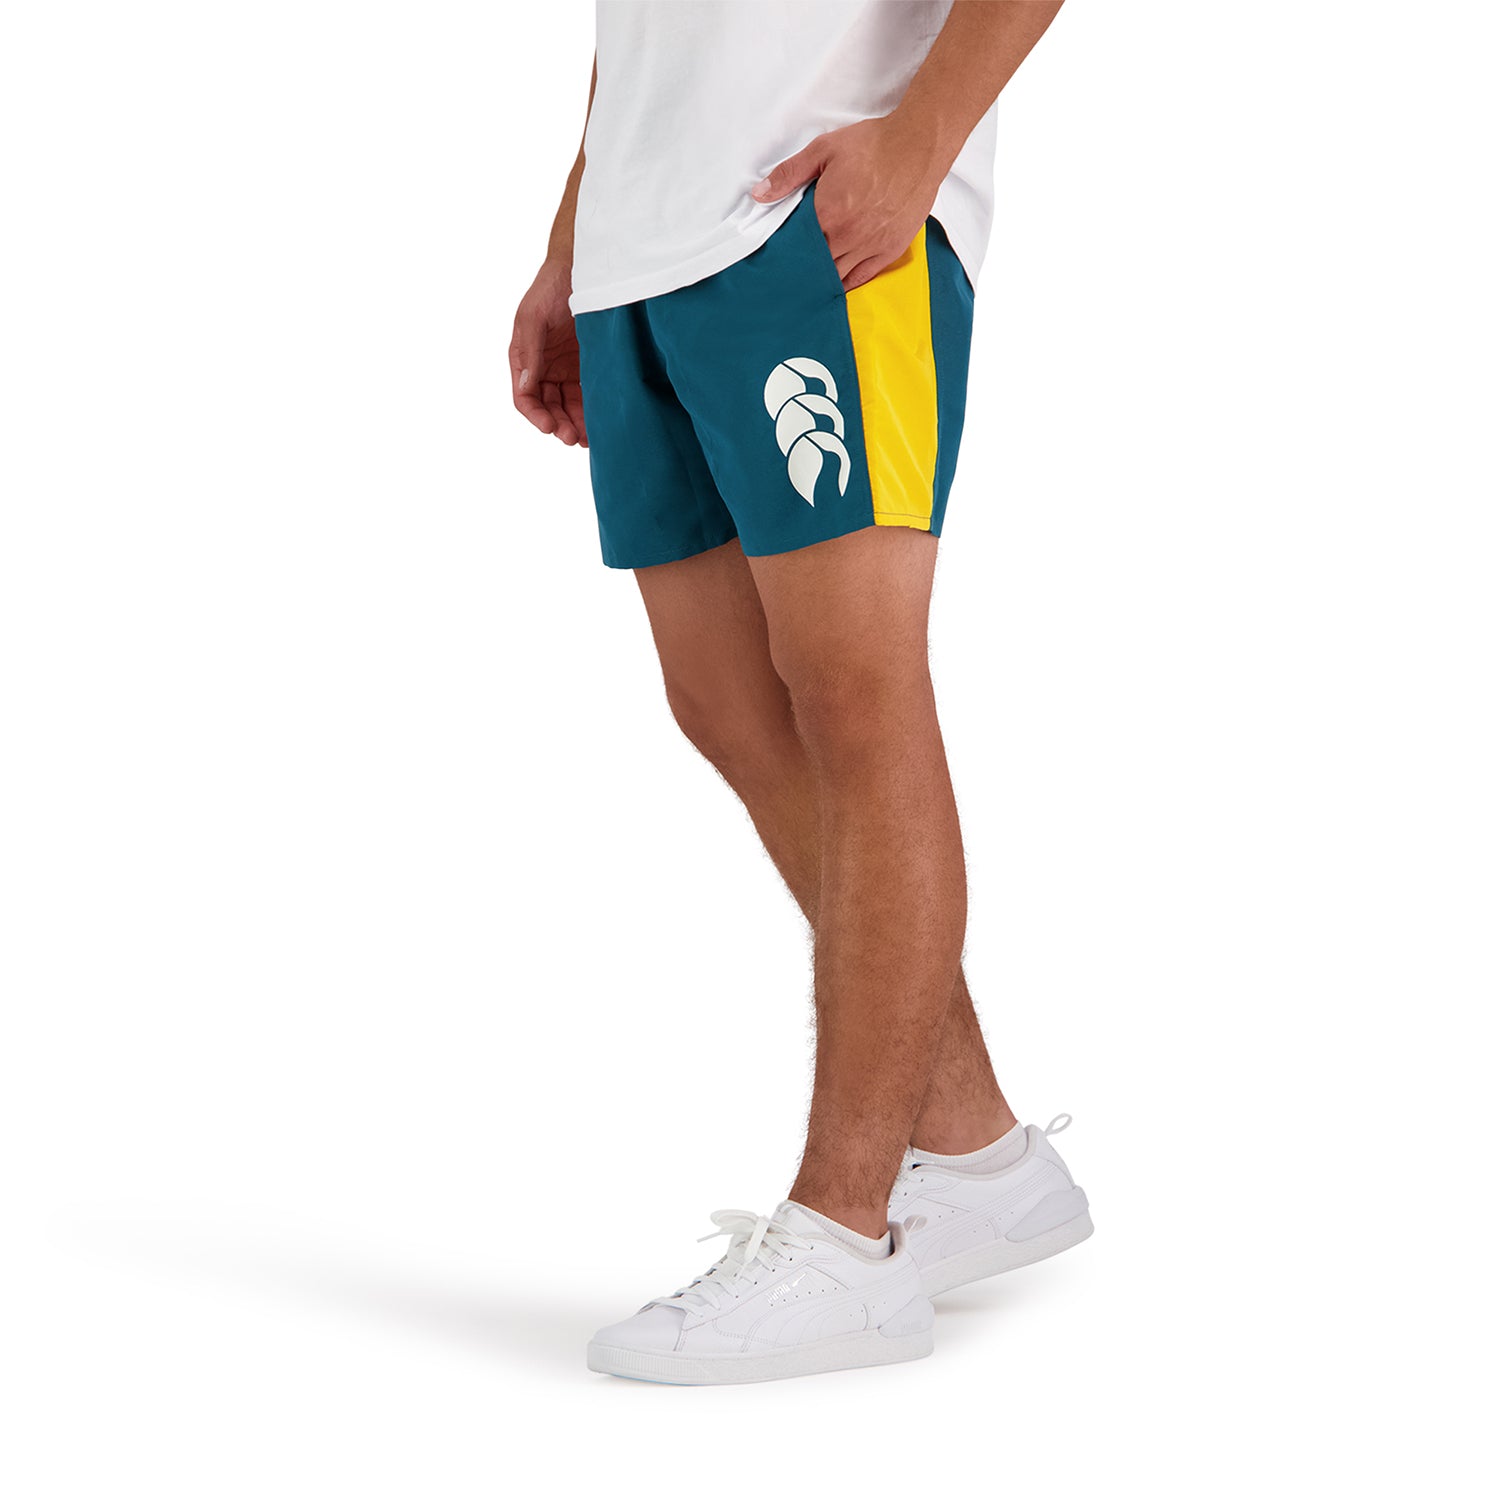 Panel Tactic Short H2 22 - The Rugby Shop Darwin